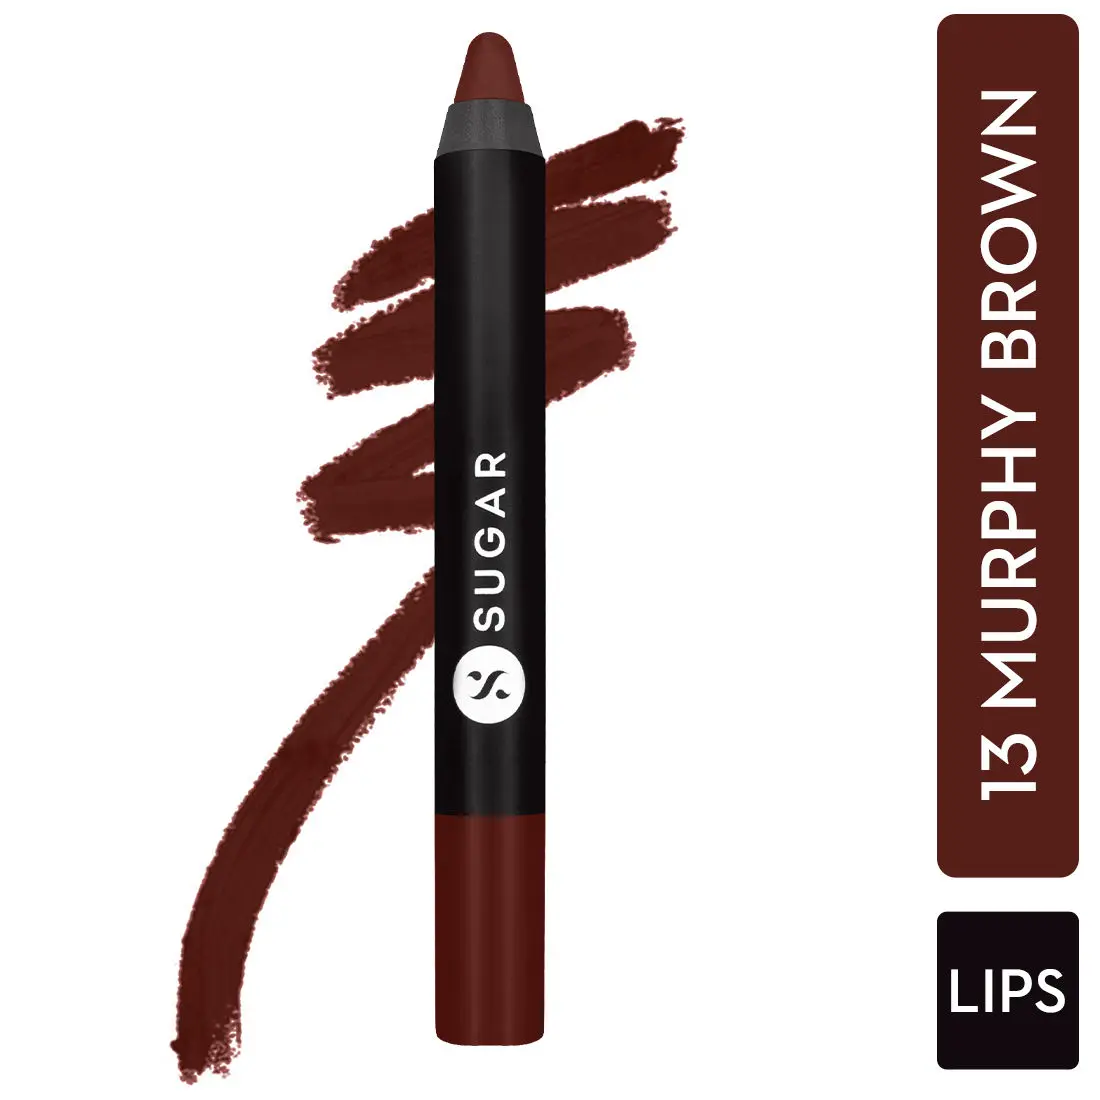 SUGAR Cosmetics - Matte As Hell - Crayon Lipstick -13 Murphy Brown (Chocolate Burgundy) - 2.8 gms - Bold and Silky Matte Finish Lipstick, Lightweight, Lasts Up to 12 hours